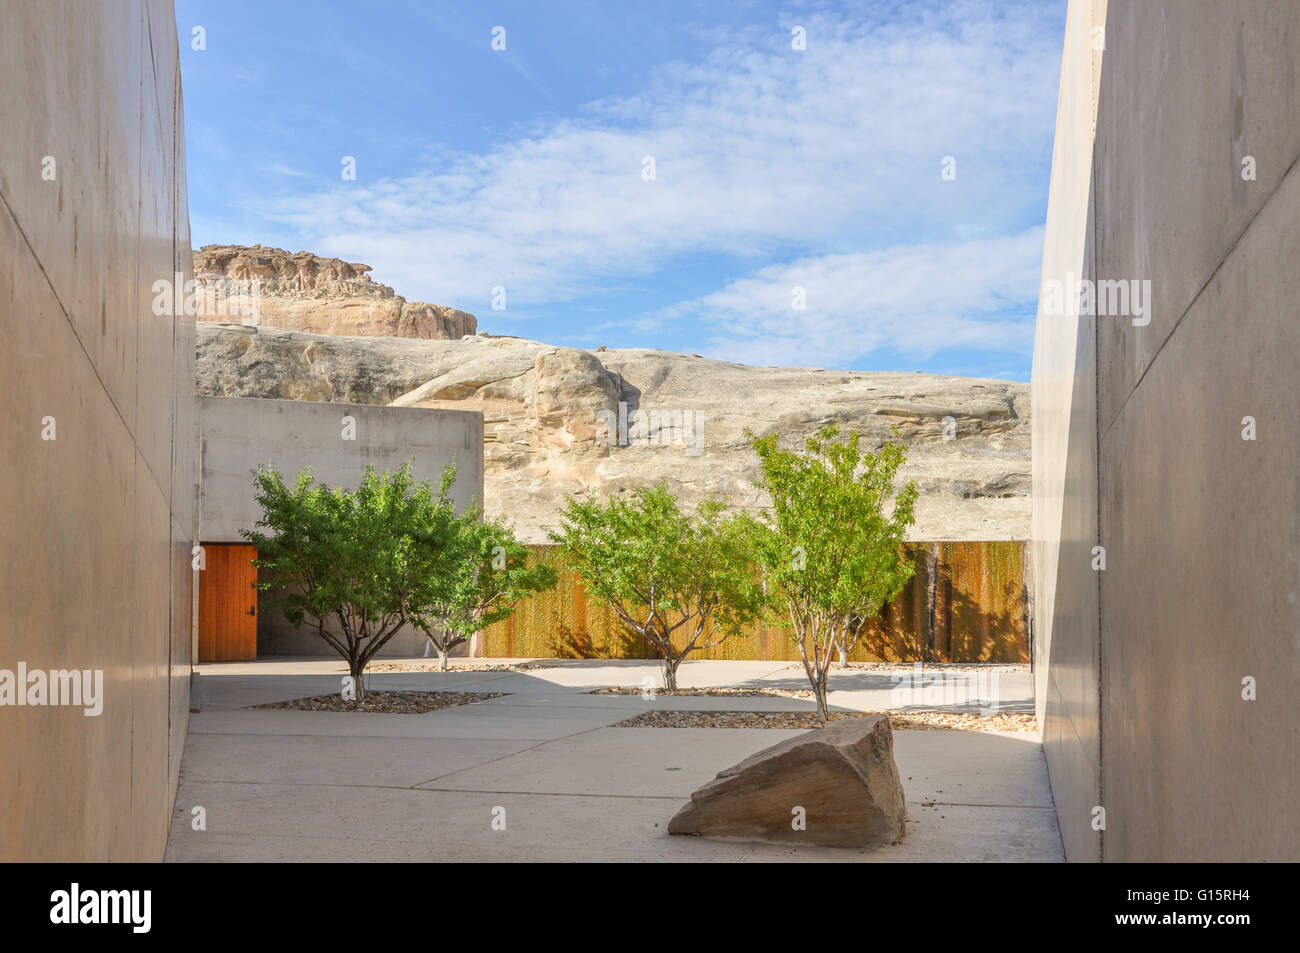 concrete walls surrounding a terrace with green trees and rock formations at a Utah resort, Amangiri Stock Photo